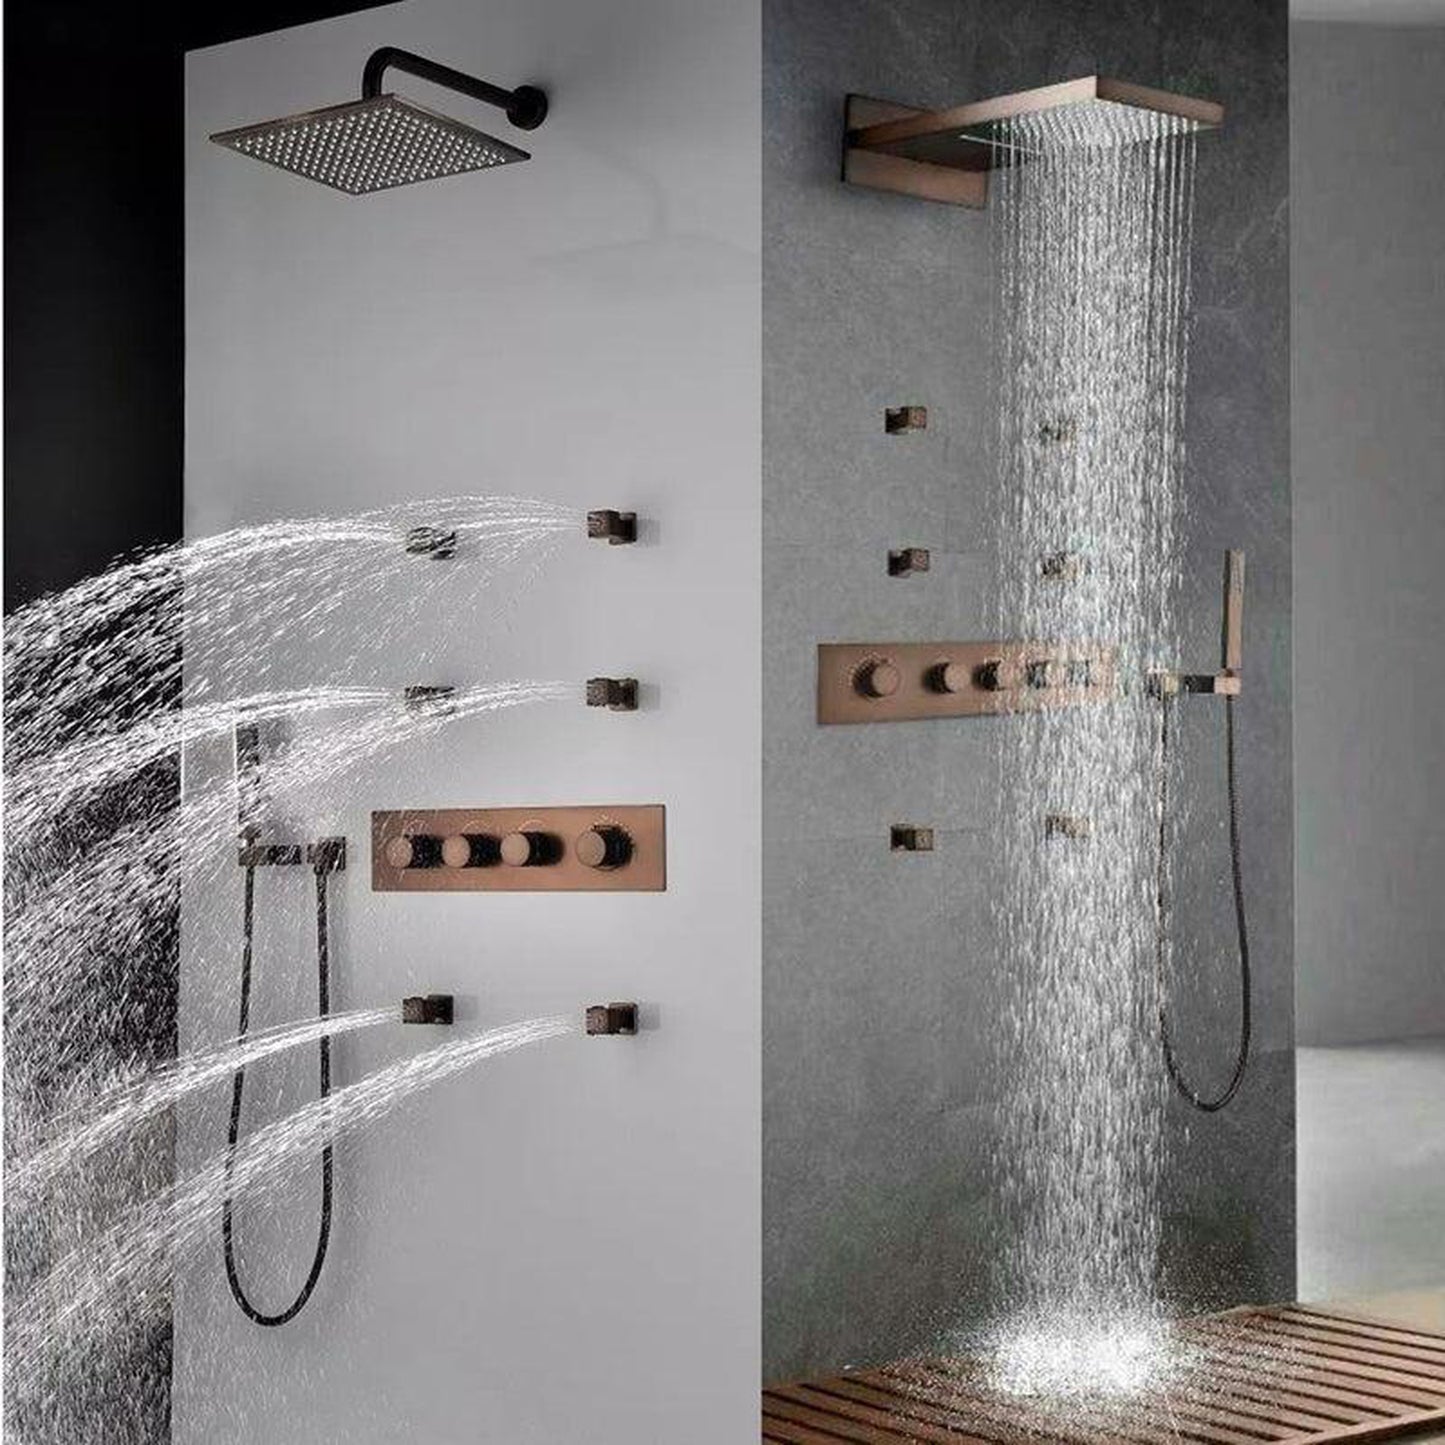 Fontana Lyon Oil Rubbed Bronze Ceiling Mounted Luxurious Rainfall Bathroom Shower System With 6-Body Jets and Hand Shower